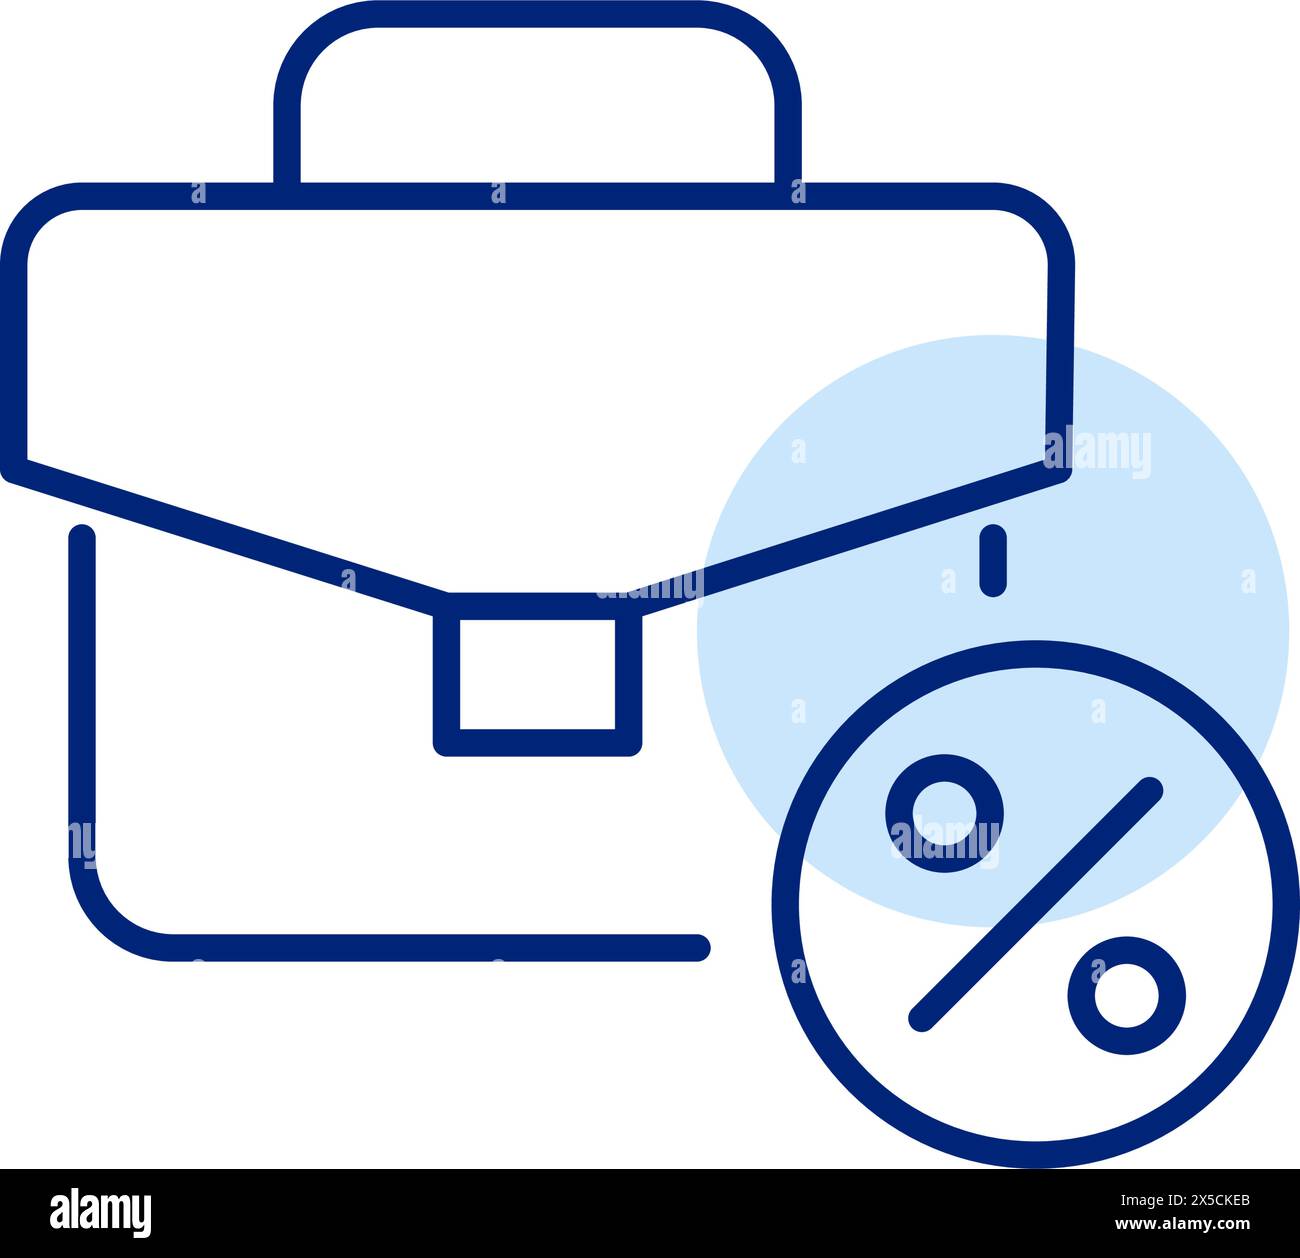 Briefcase and percent. Profit margins, discounts and deals for business or corporate clients. Increases in business earnings Stock Vector